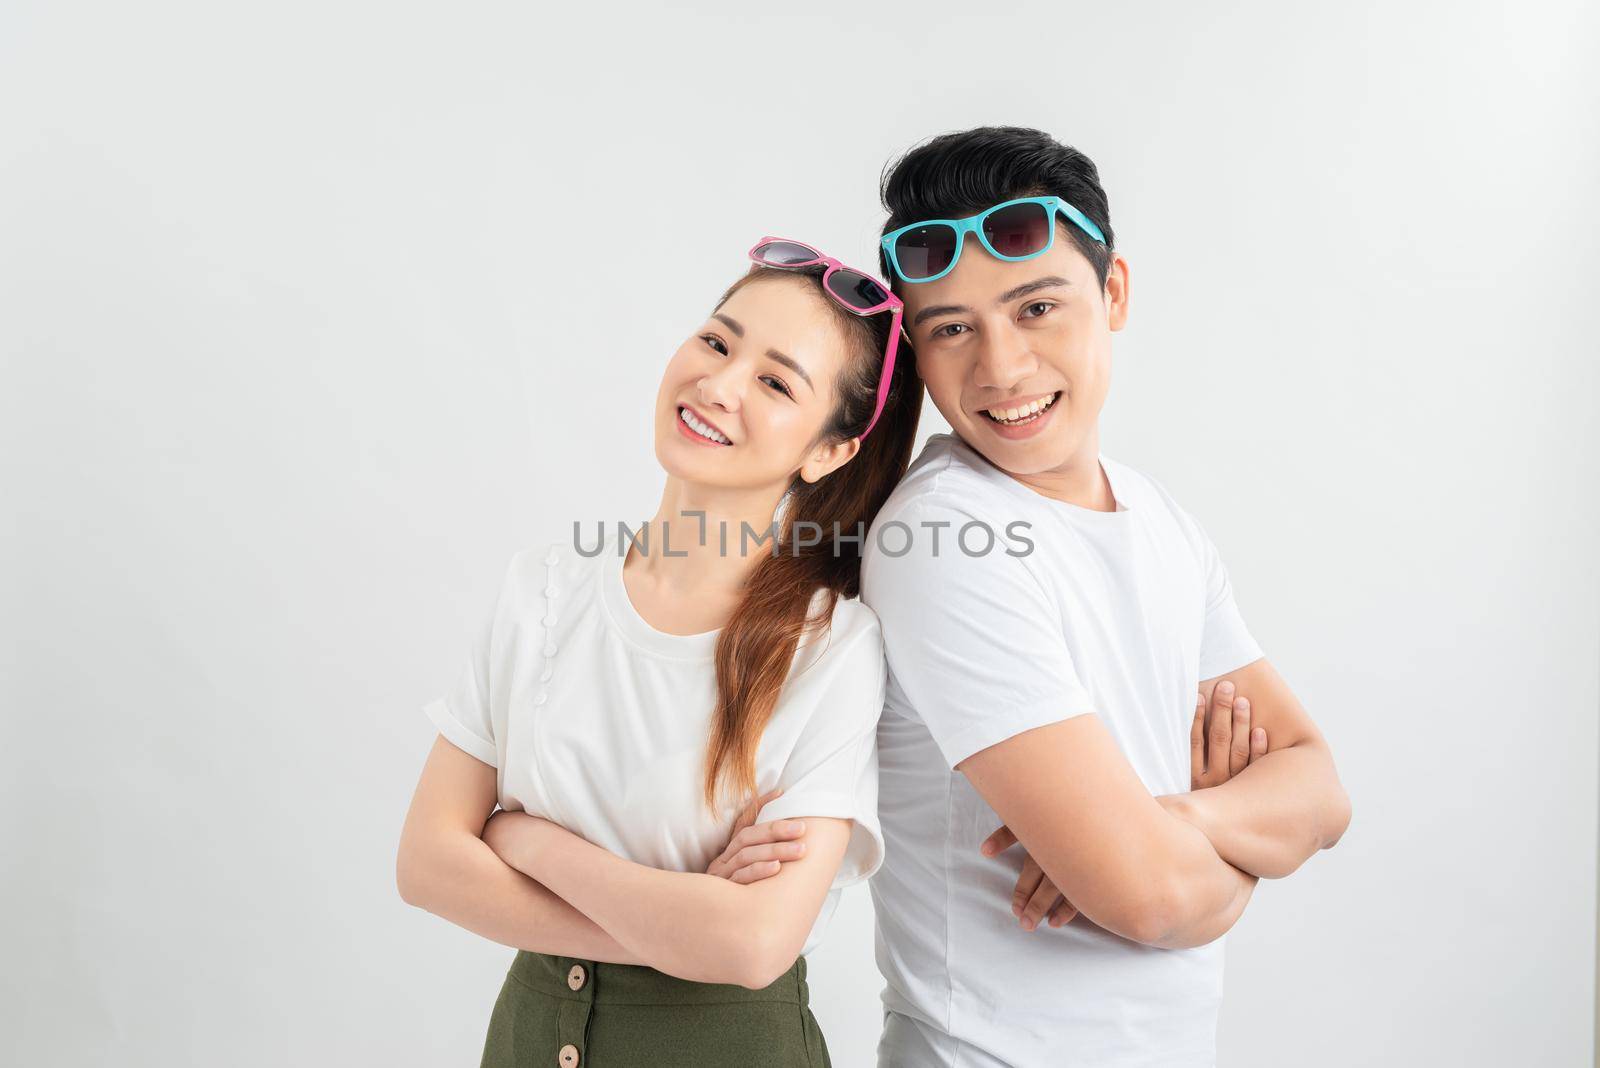 Cheerful hsppy man and woman with crossed hands standing back to back.